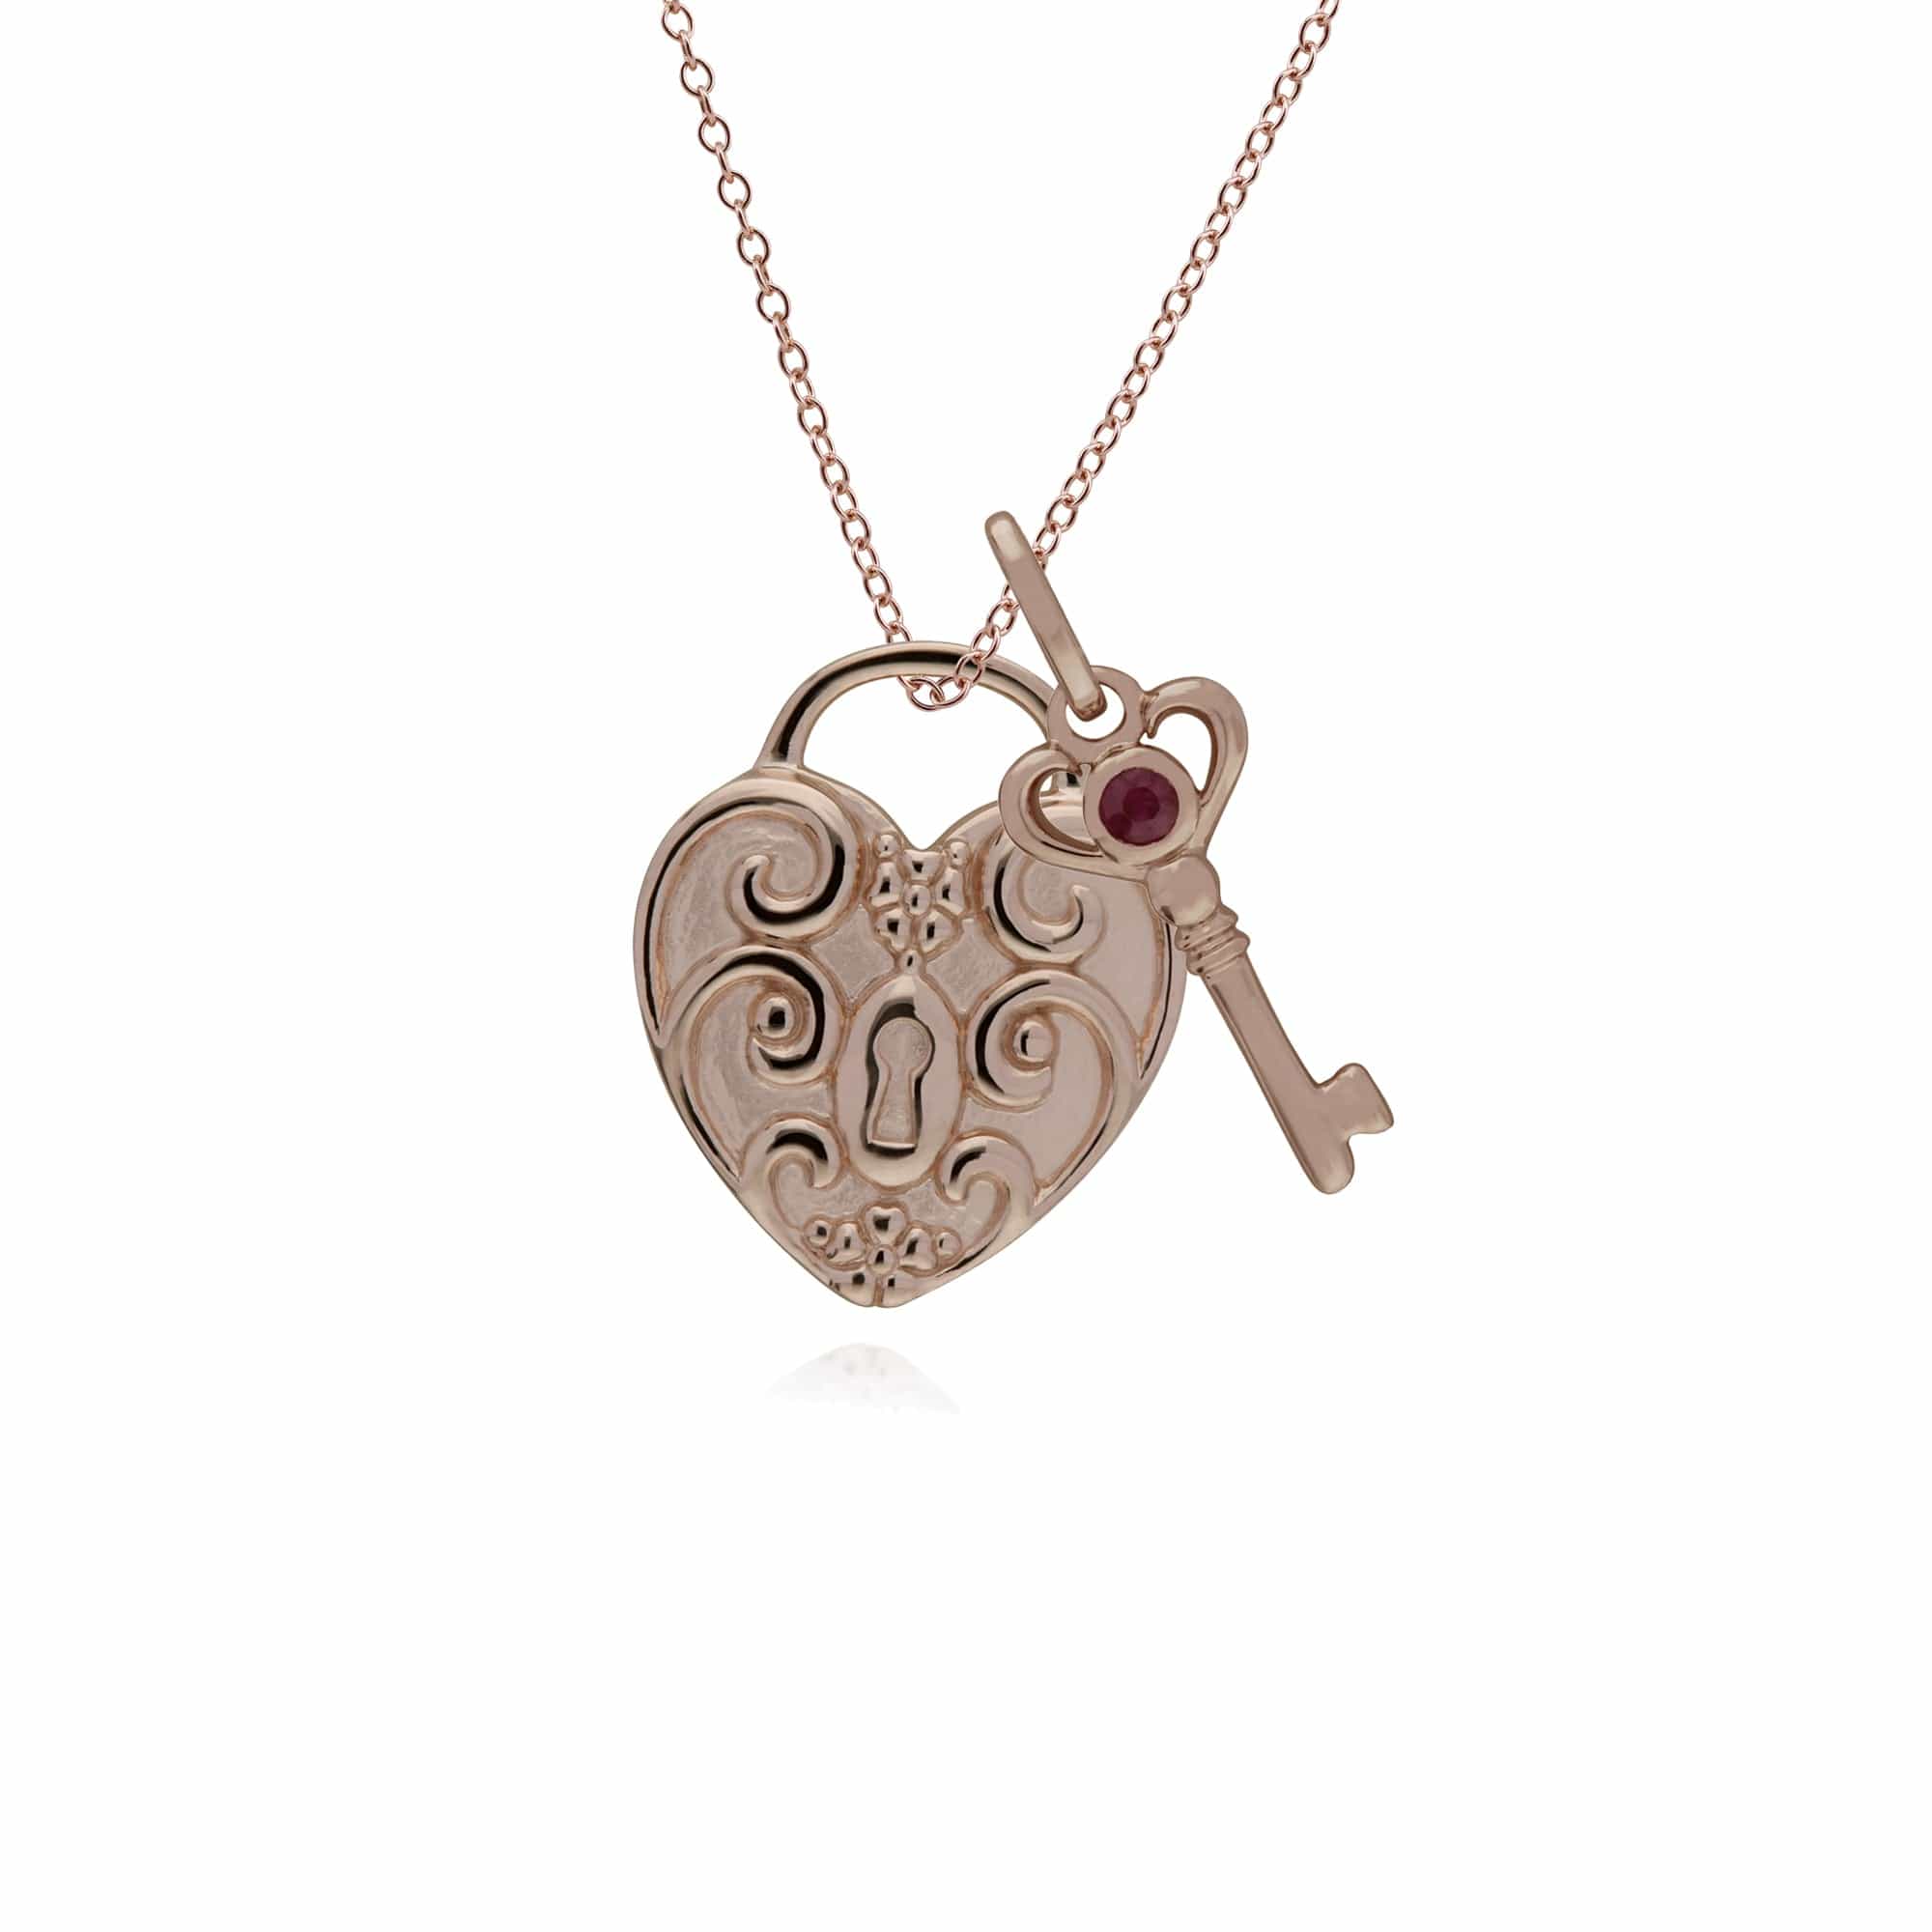 270P026301925-270P026501925 Classic Swirl Heart Lock Pendant & Ruby Key Charm in Rose Gold Plated 925 Sterling Silver 1